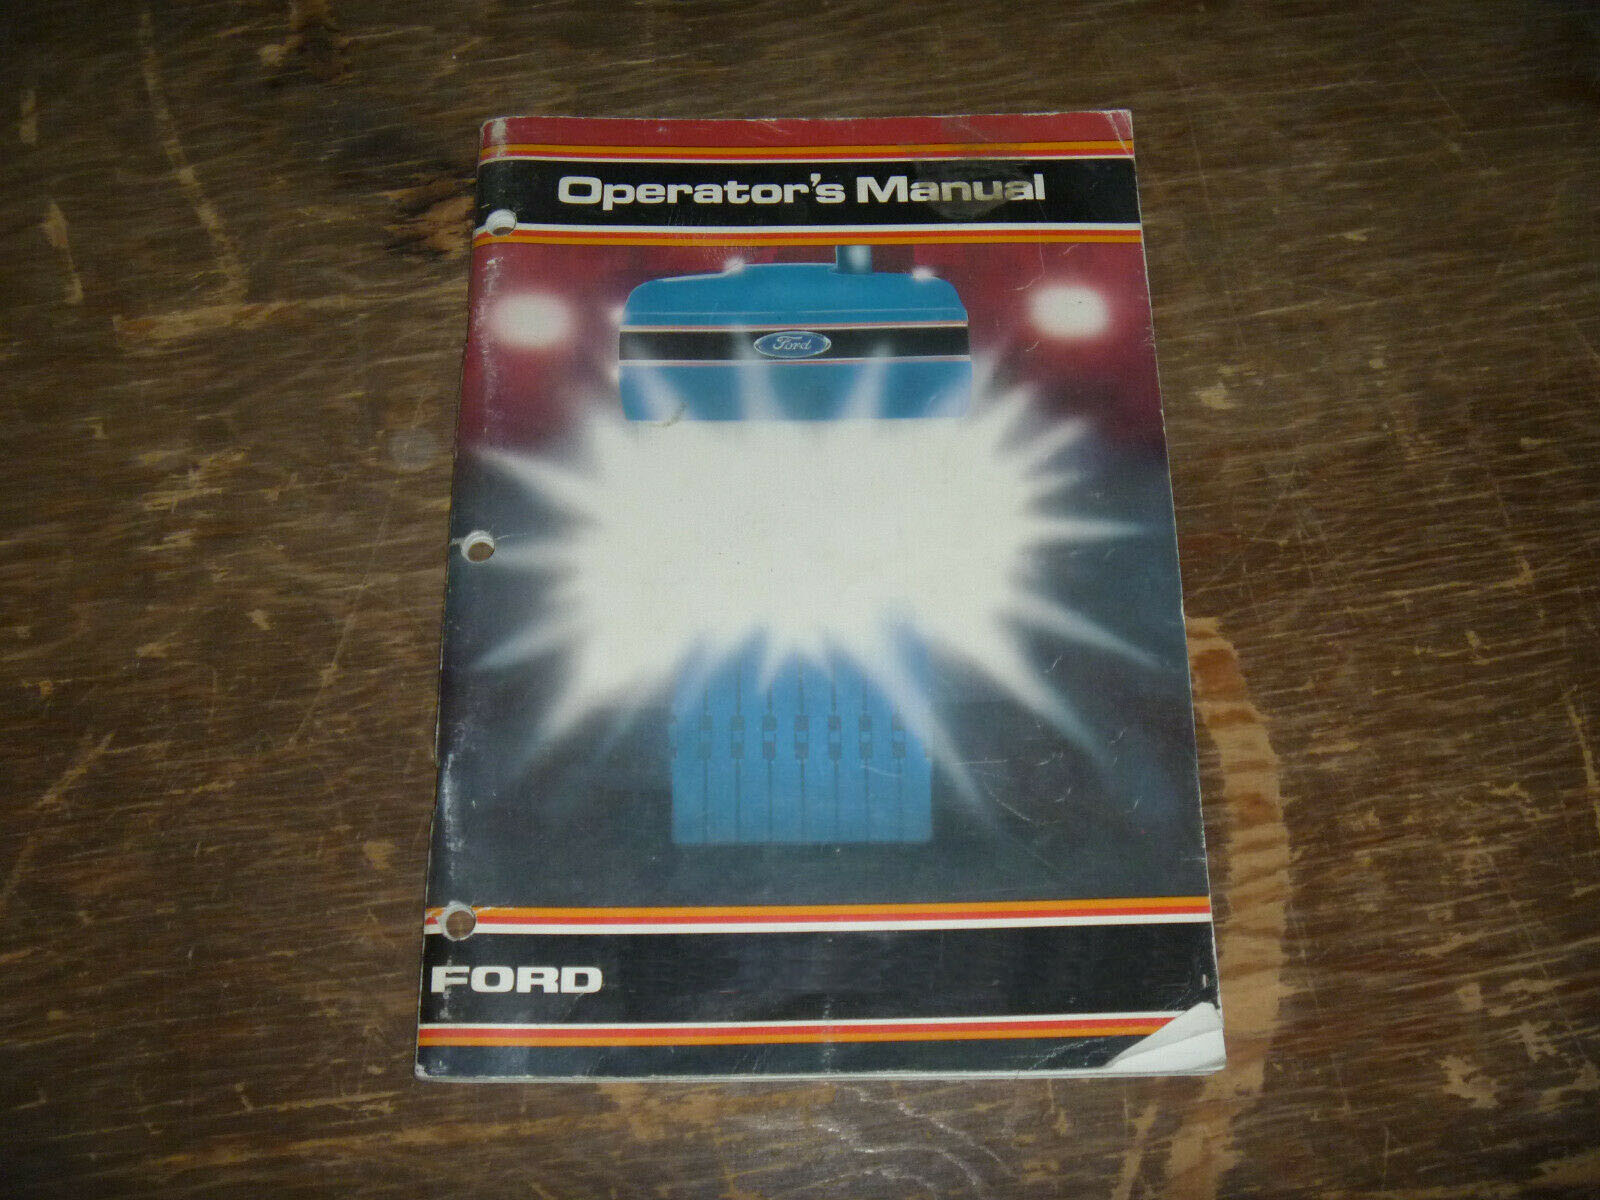 Operator's Manual for FORD Tractors model LT12H